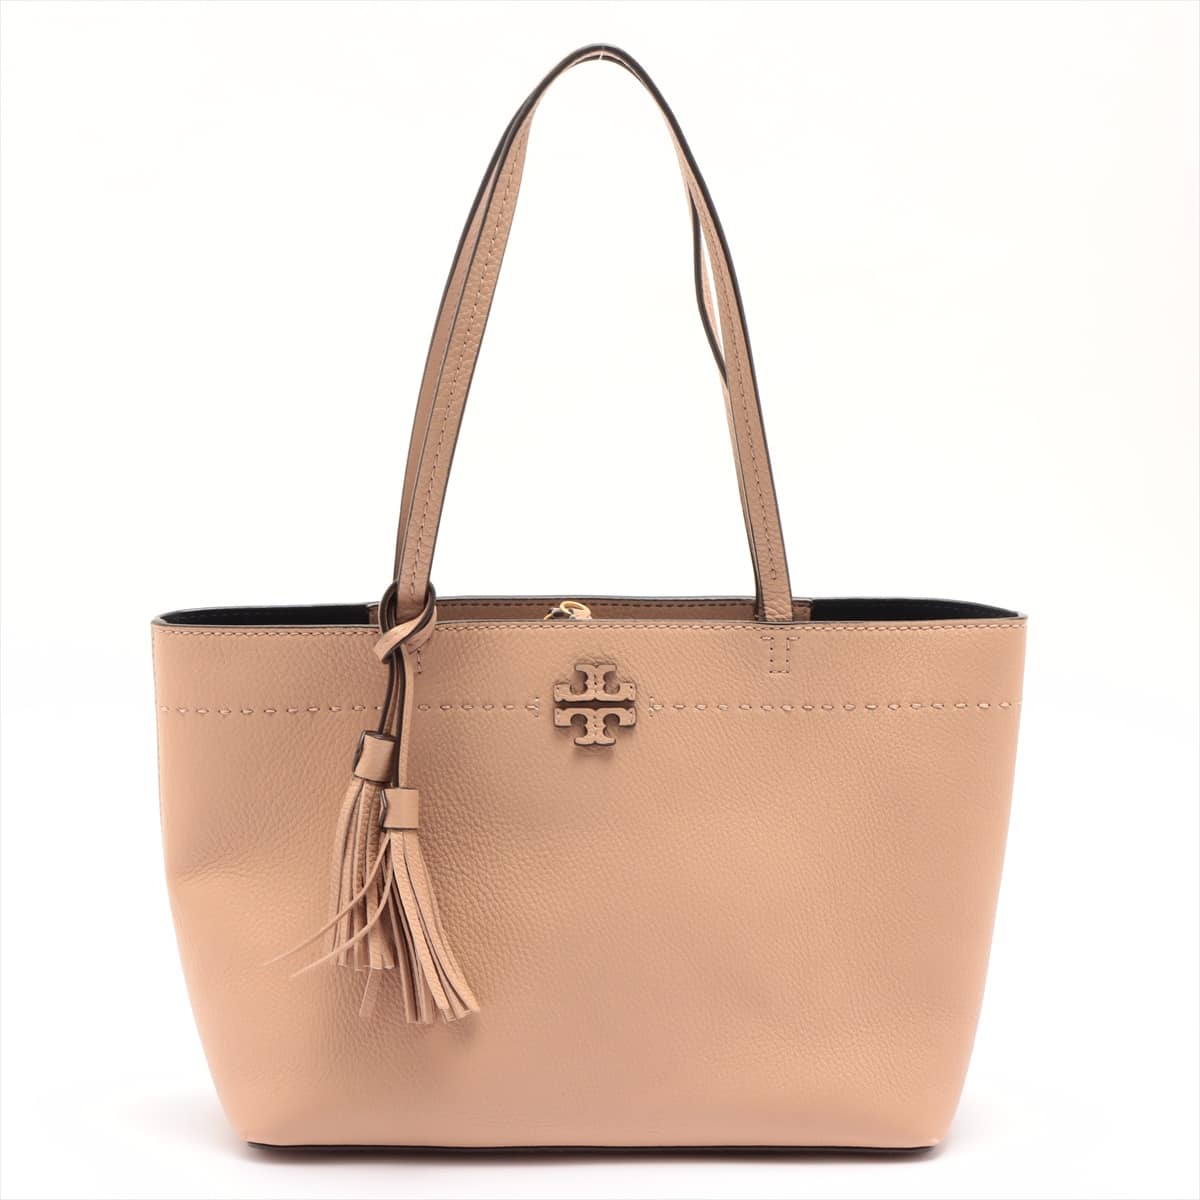 Tory Burch Leather Tote bag Beige